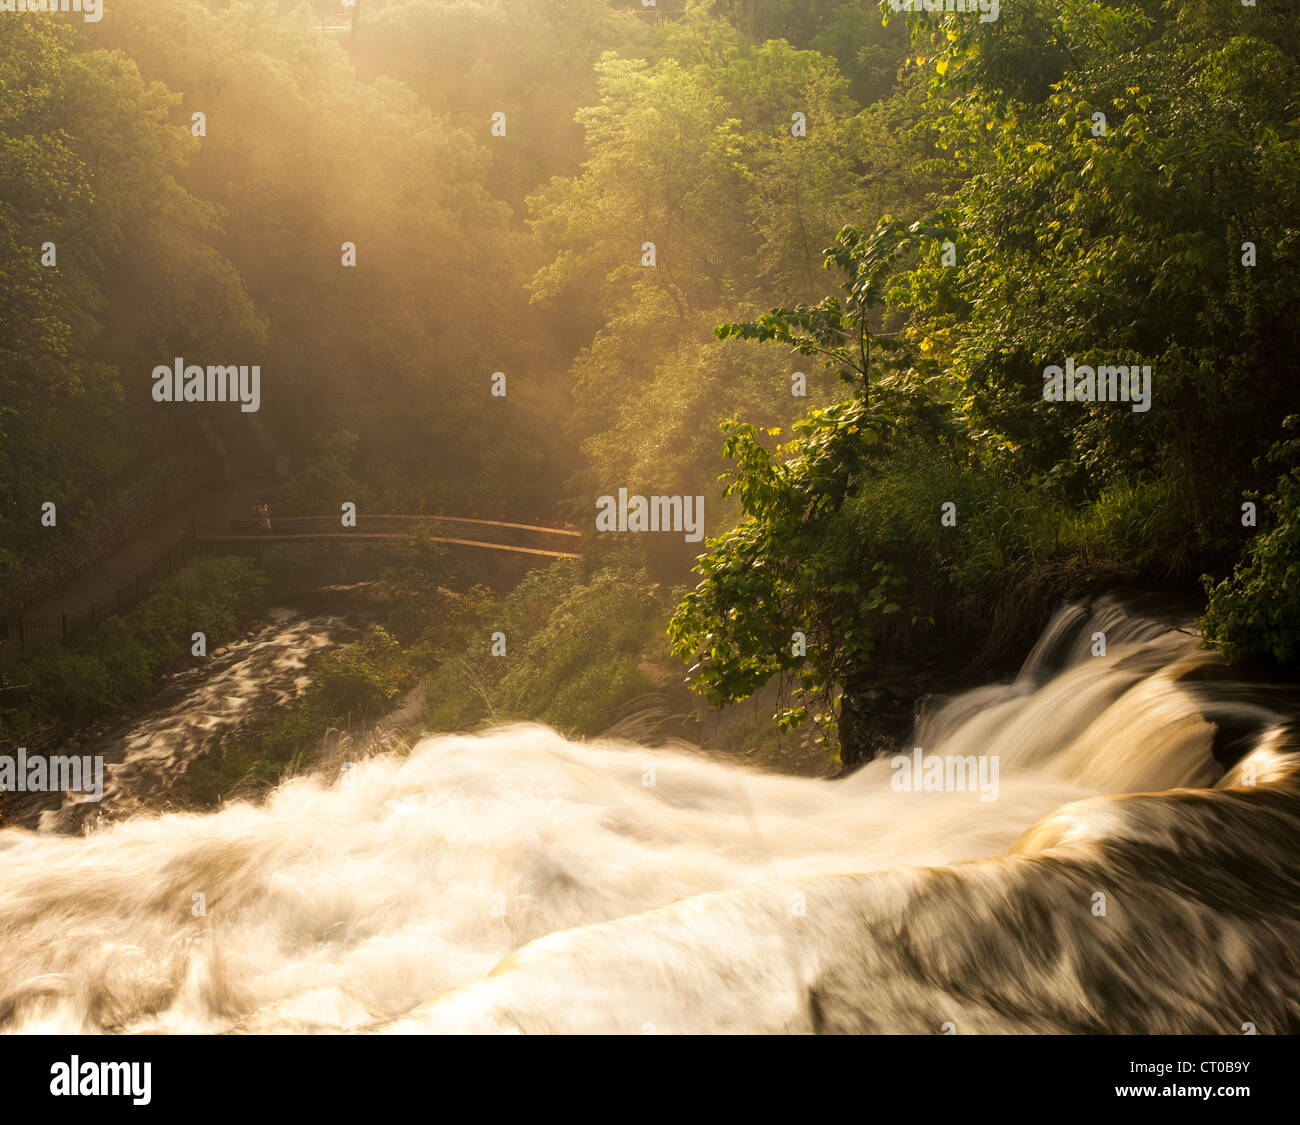 Mist fills the 53 foot tall Minnehaha Falls gorge as viewed from above the falls. Stock Photo